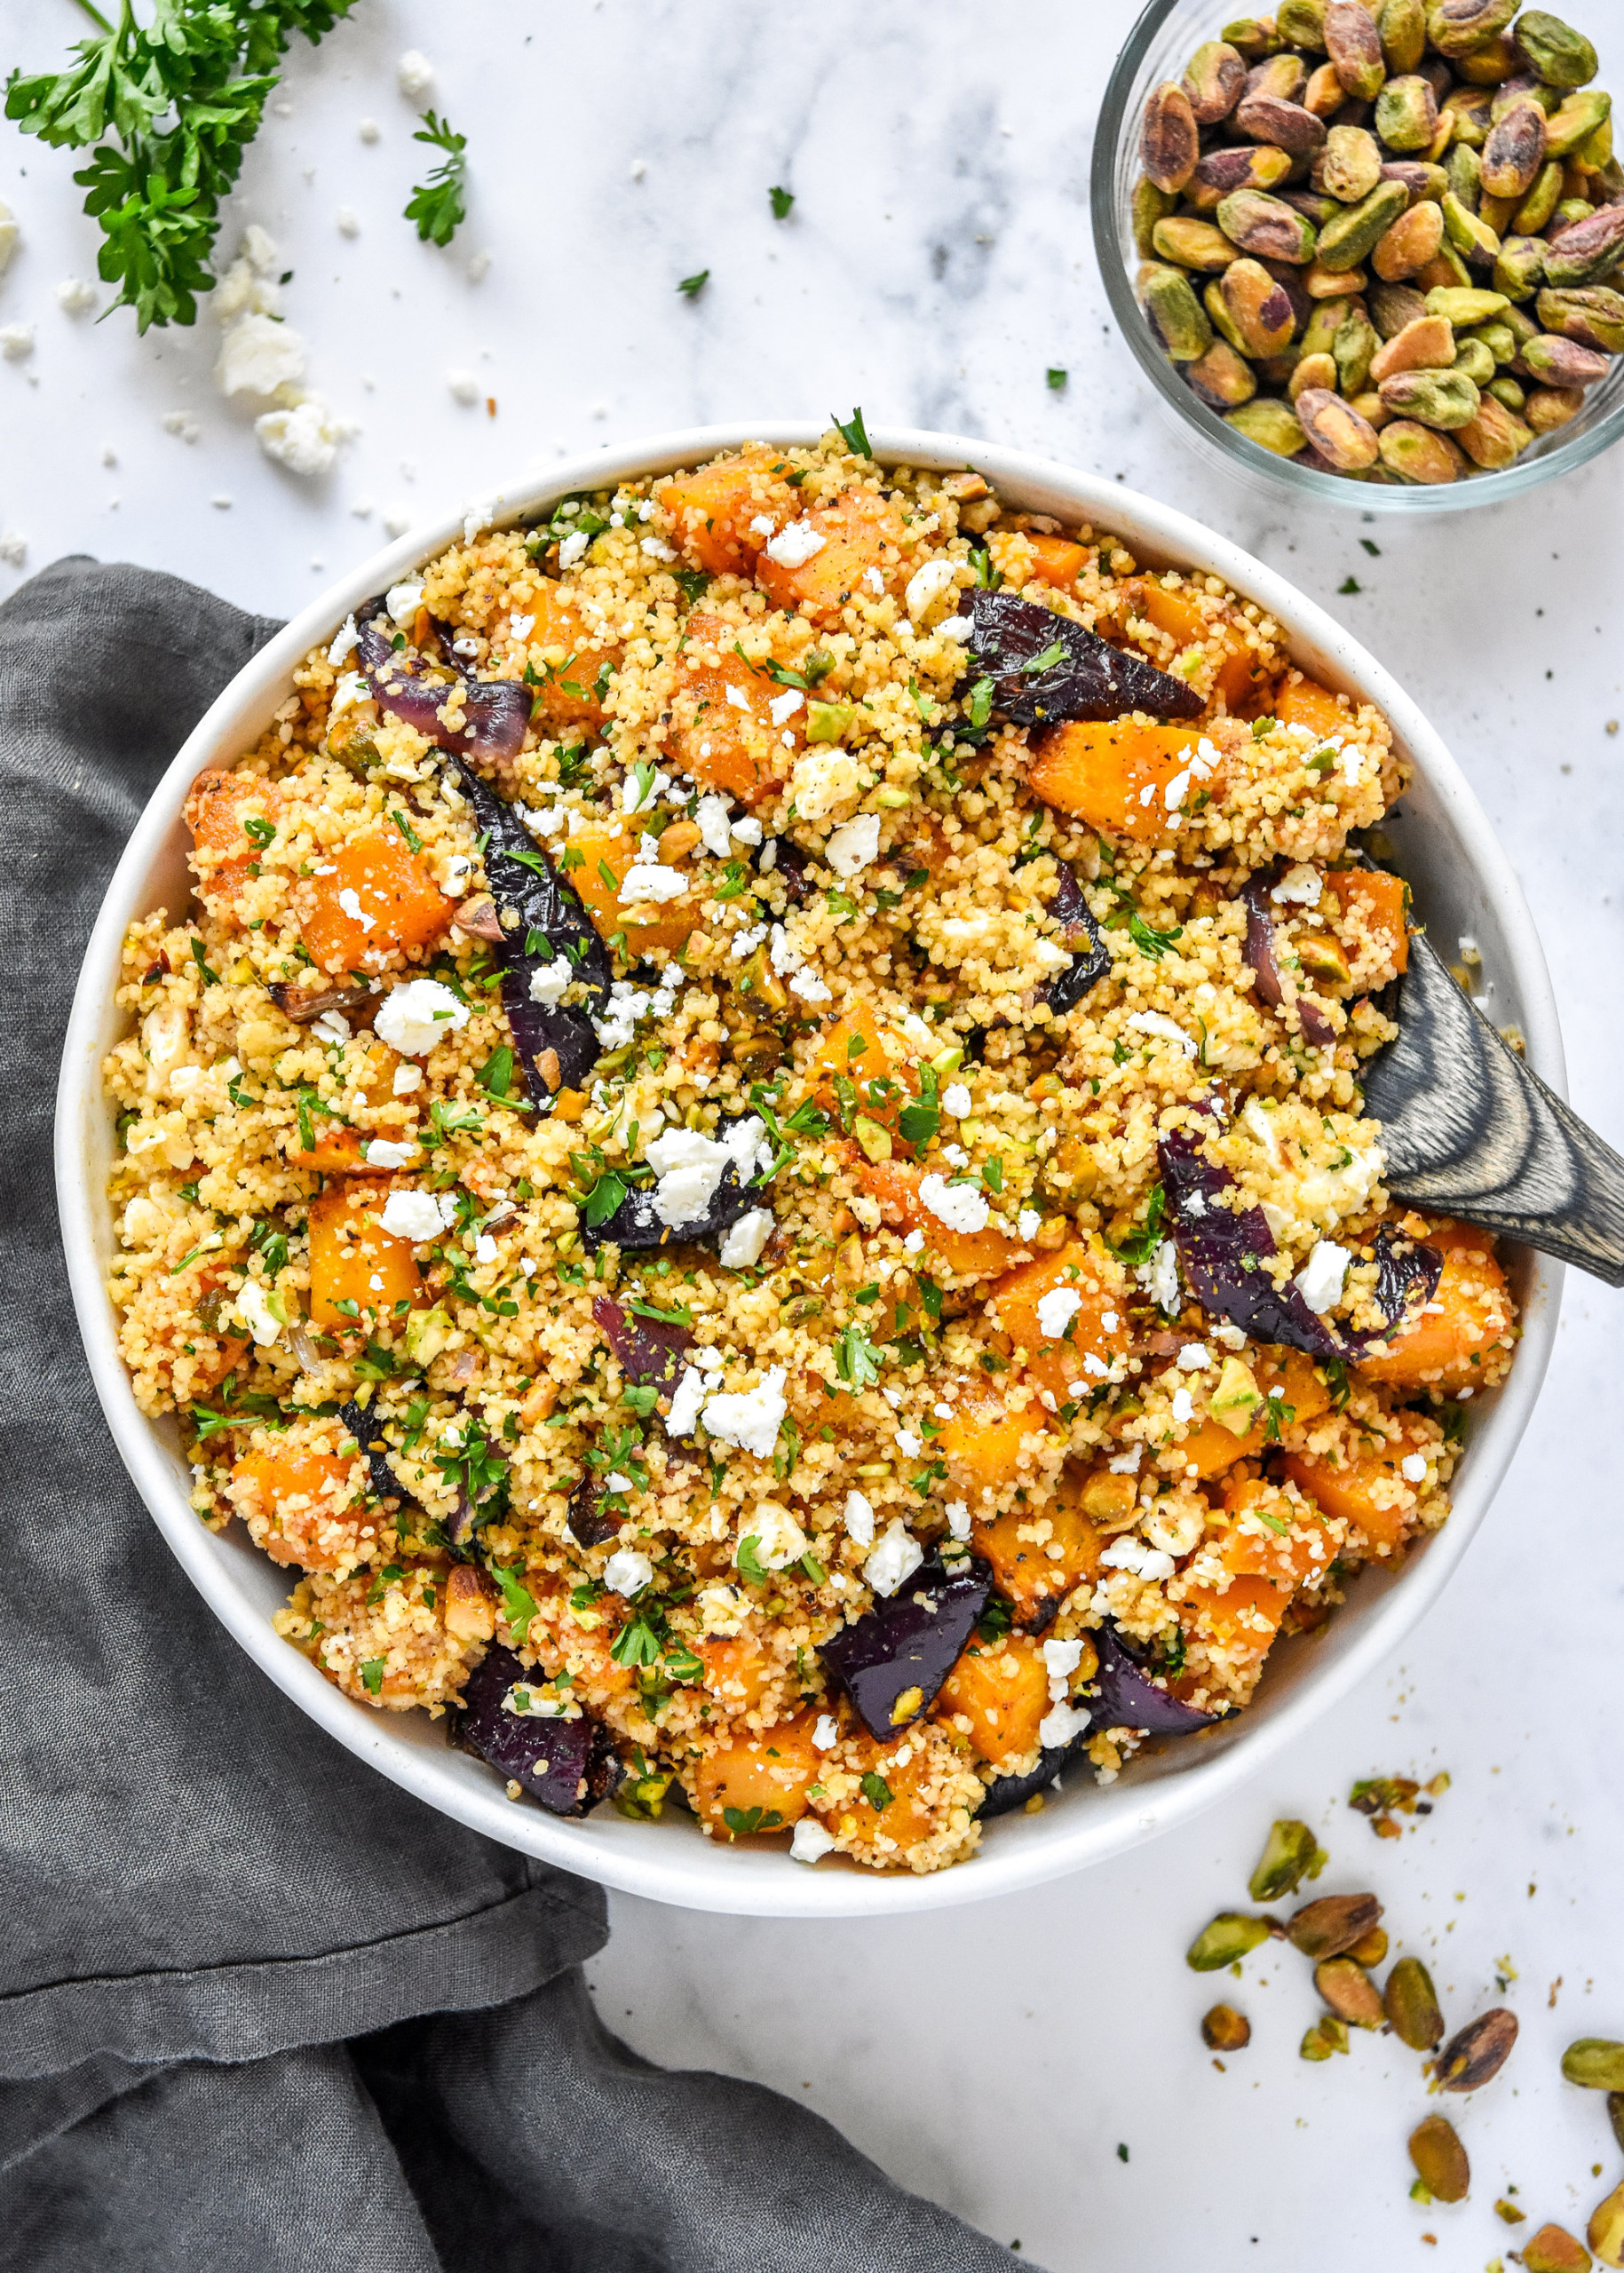 Roasted Vegetable Couscous - Cooking with Curls